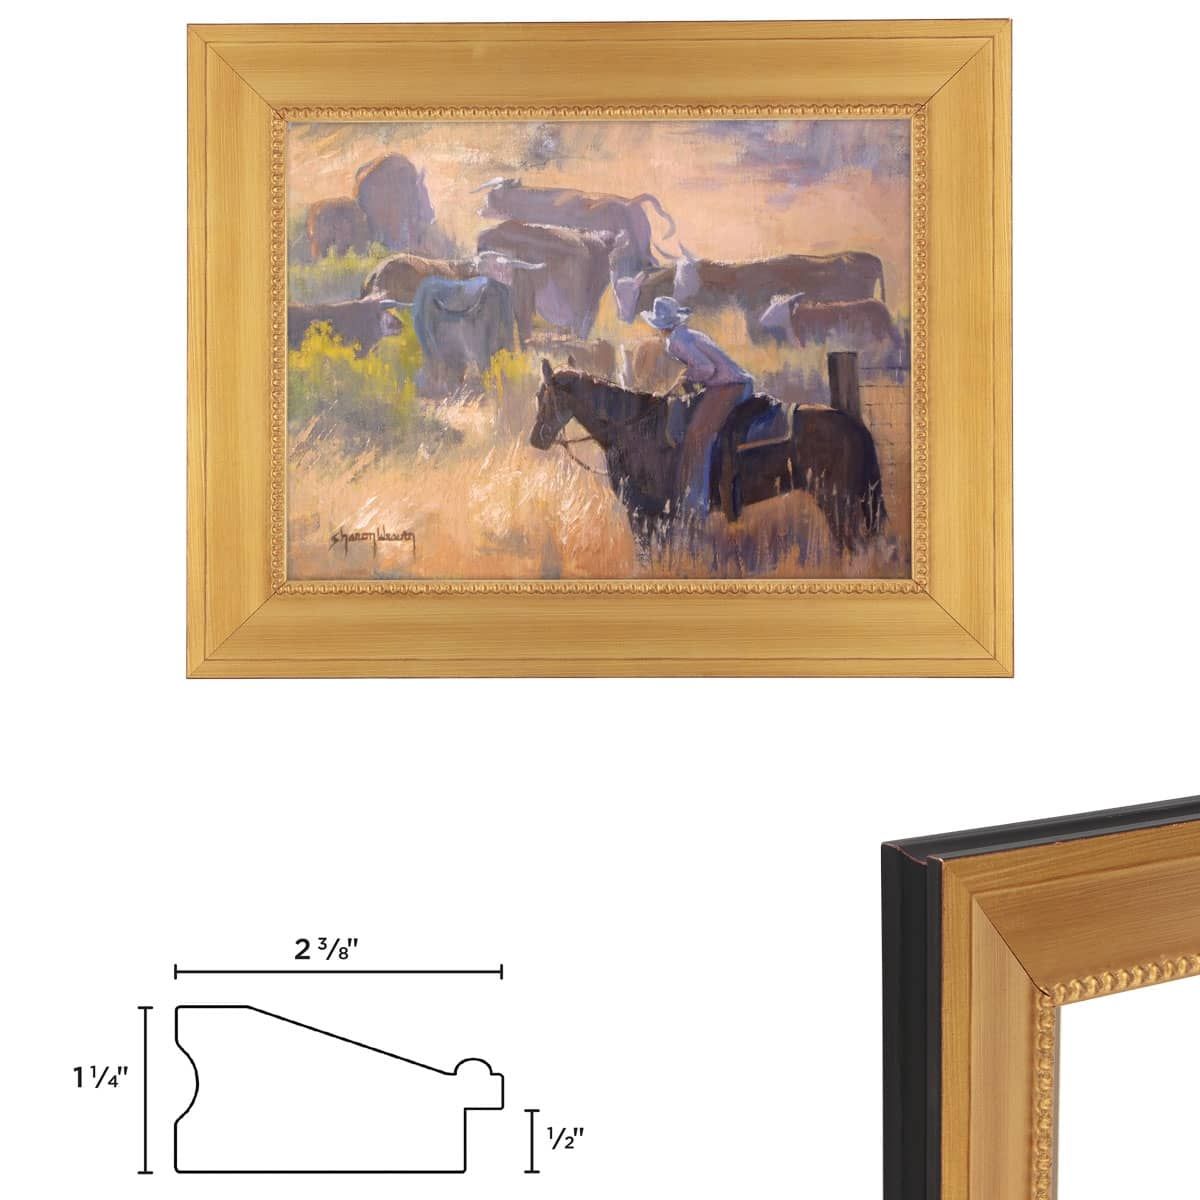 Millbrook Collection - Constantine 2.375" Gold Frame 20X24 w/ Acrylic